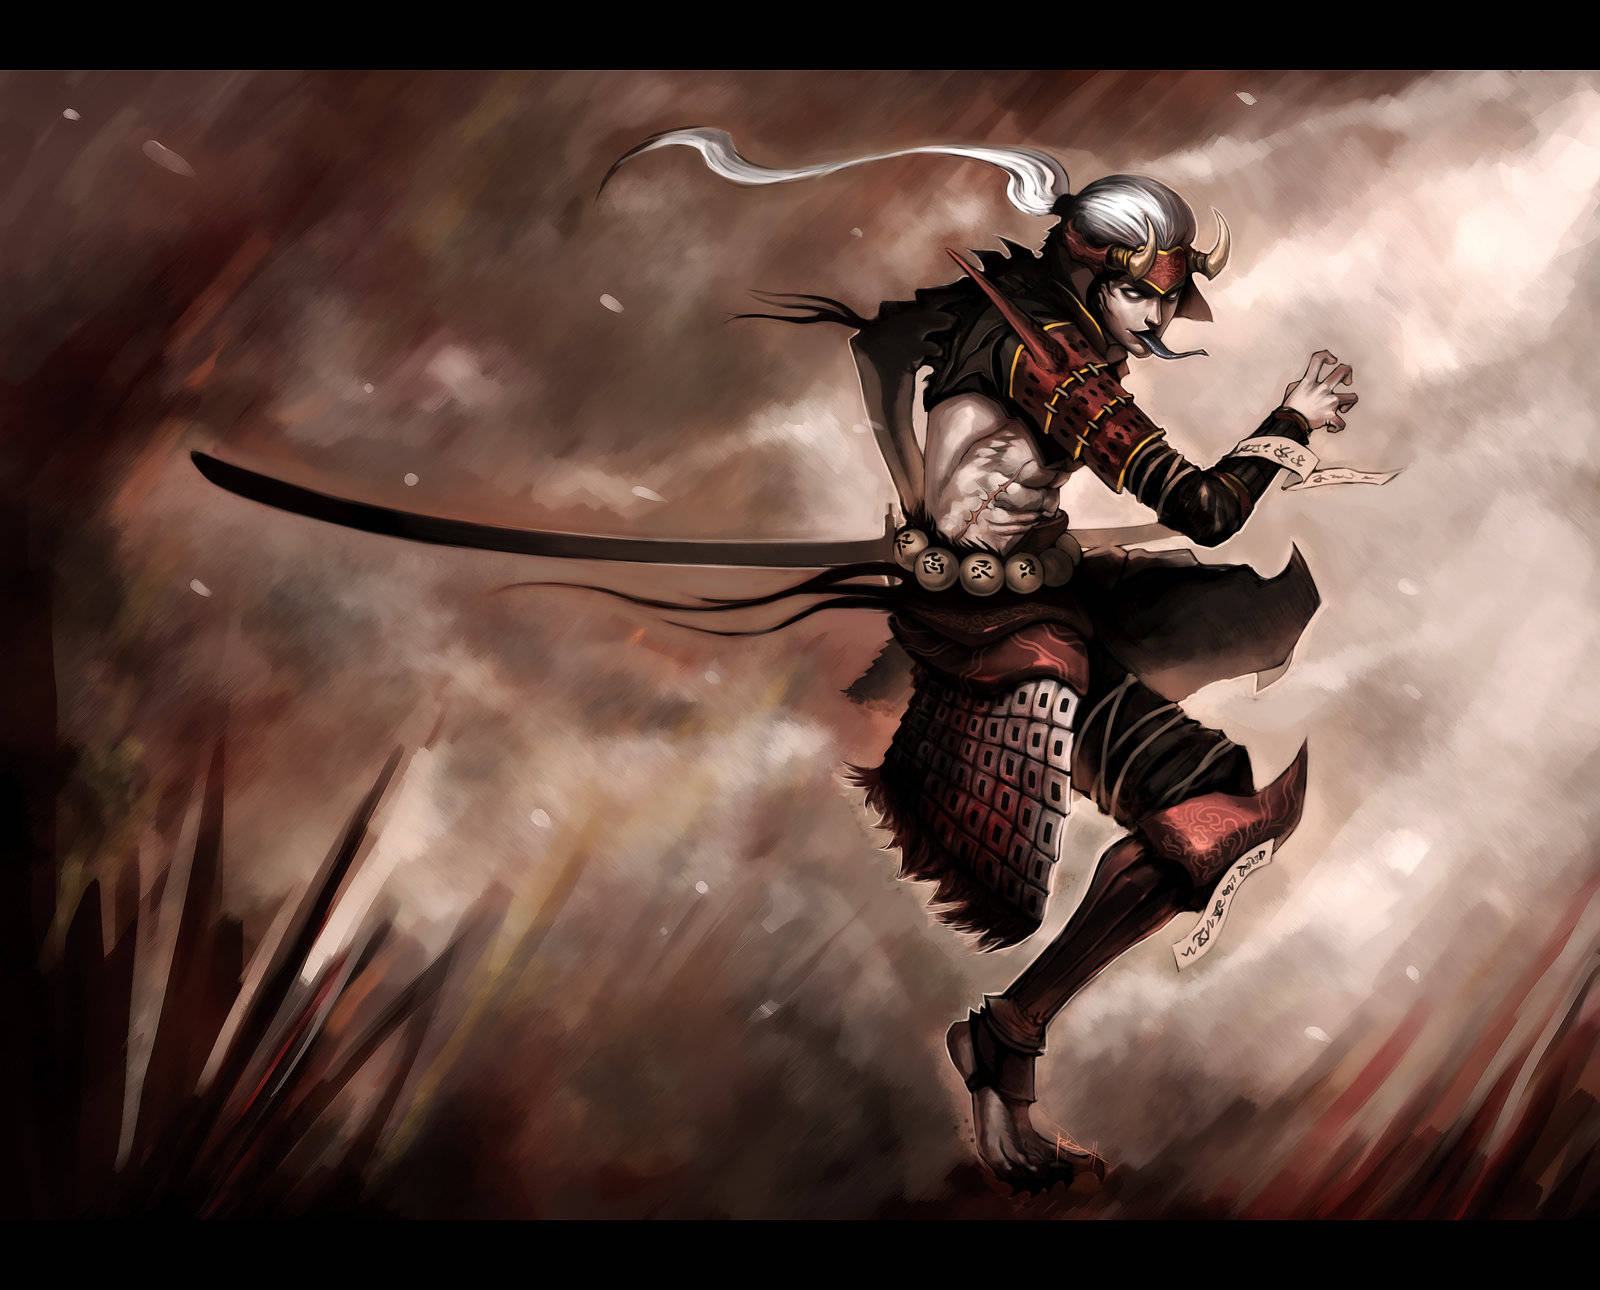 A powerful anime samurai stands his ground against his enemies Wallpaper